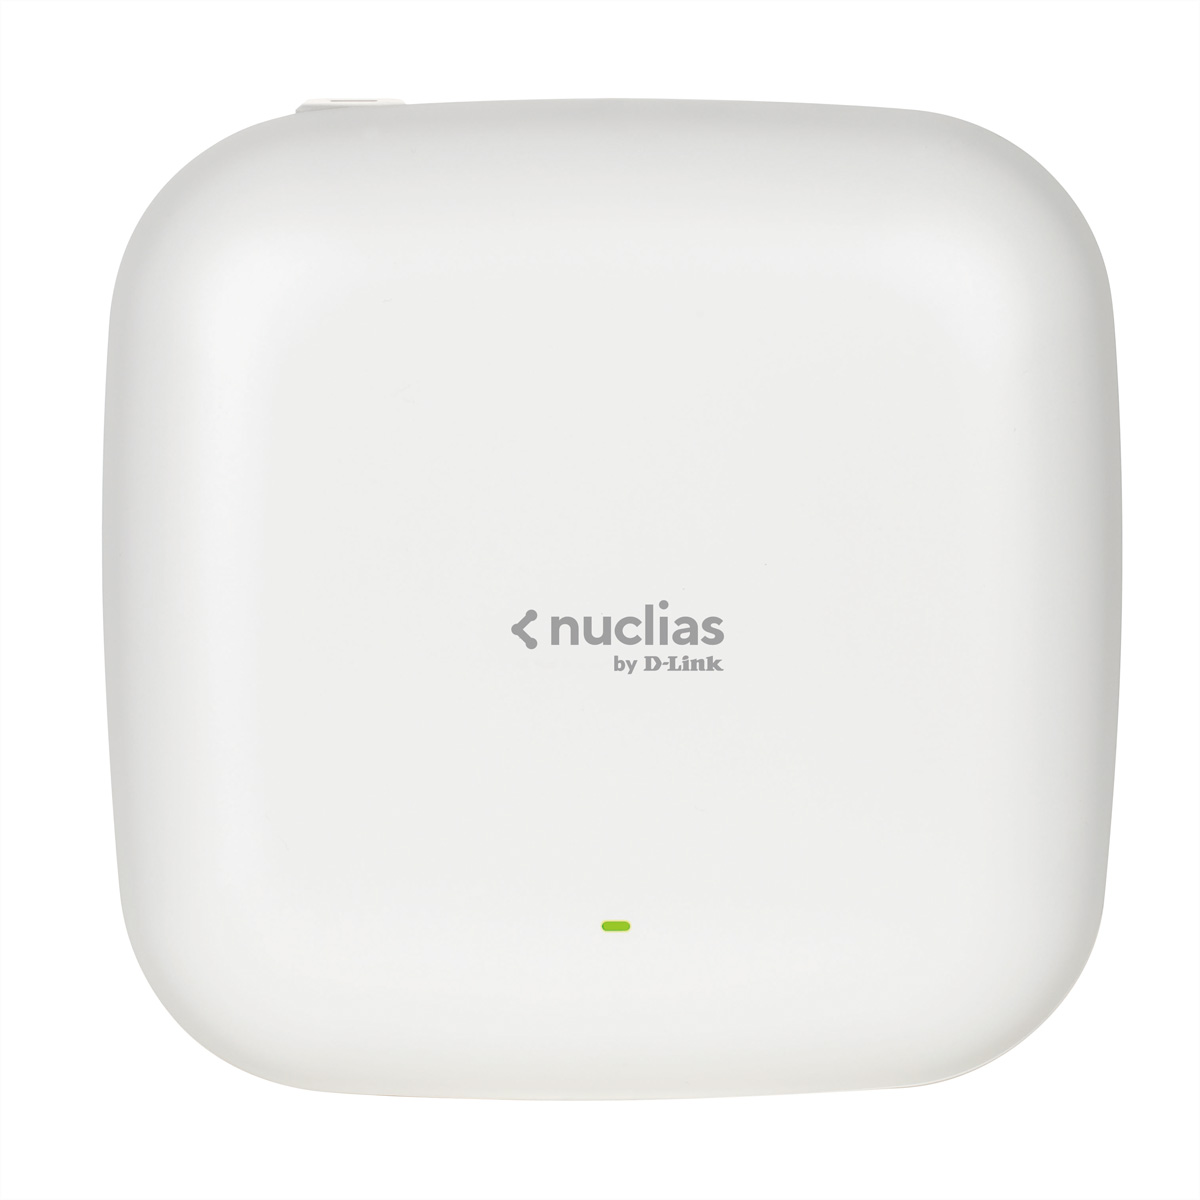 D-LINK DBA-X1230P, Nulicas Wireless AX1800 1,8 Gbit/s Access Point PoE-Extender Cloud-Managed